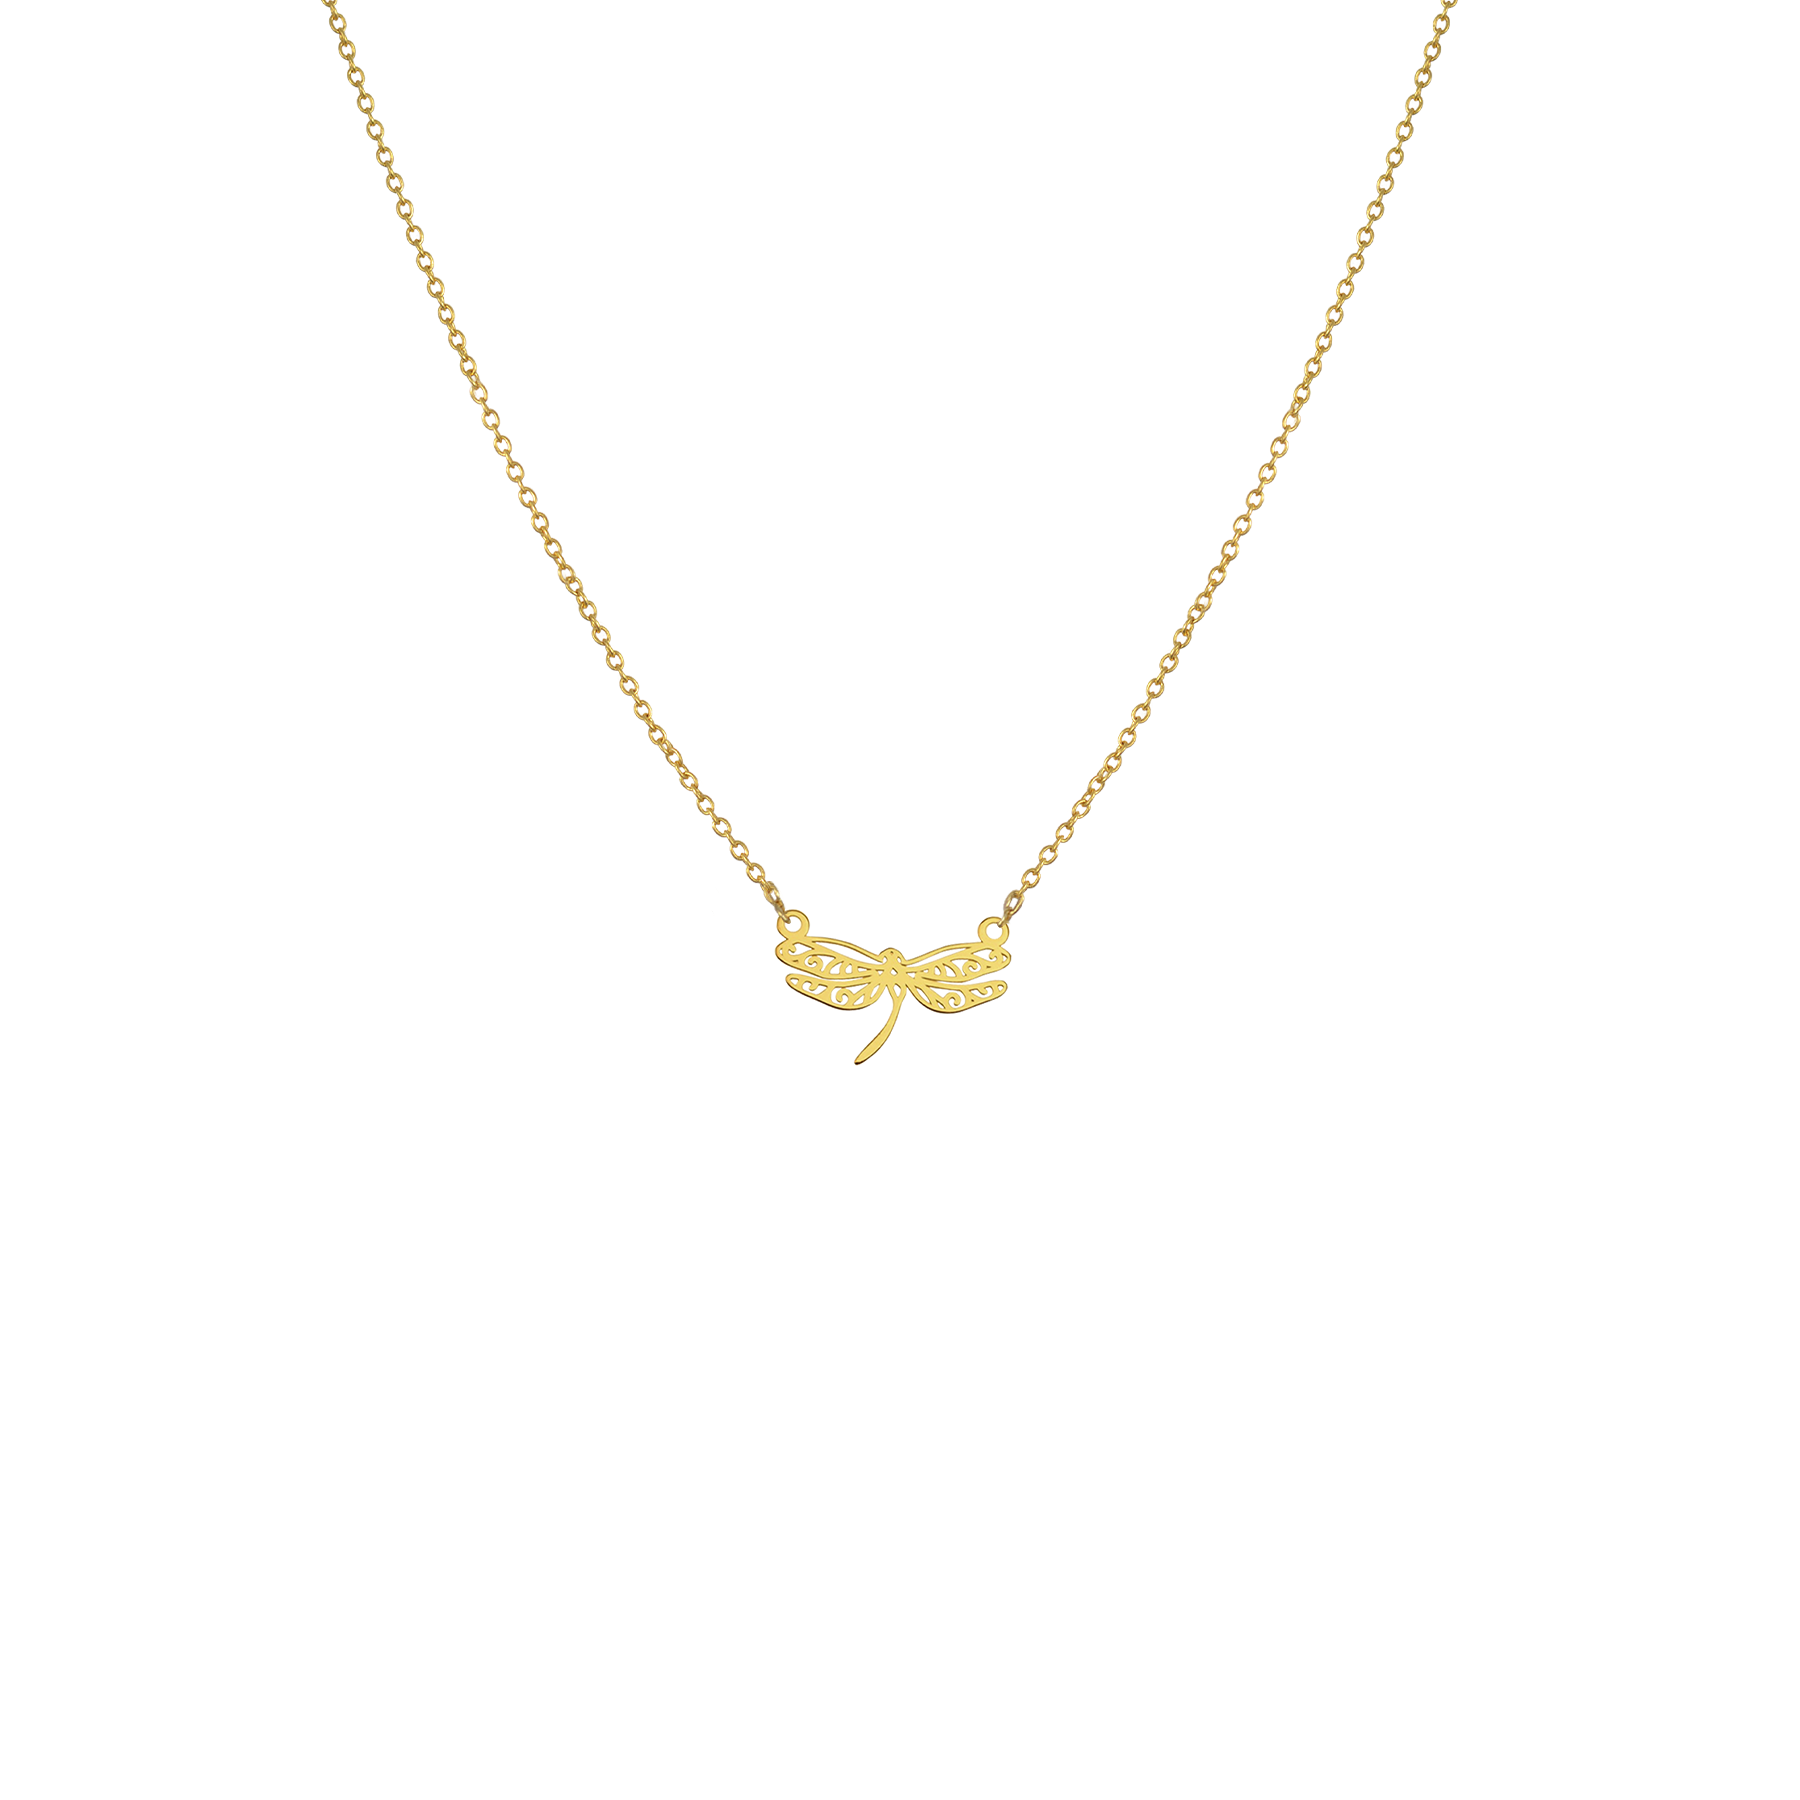 Gold dragonfly necklace